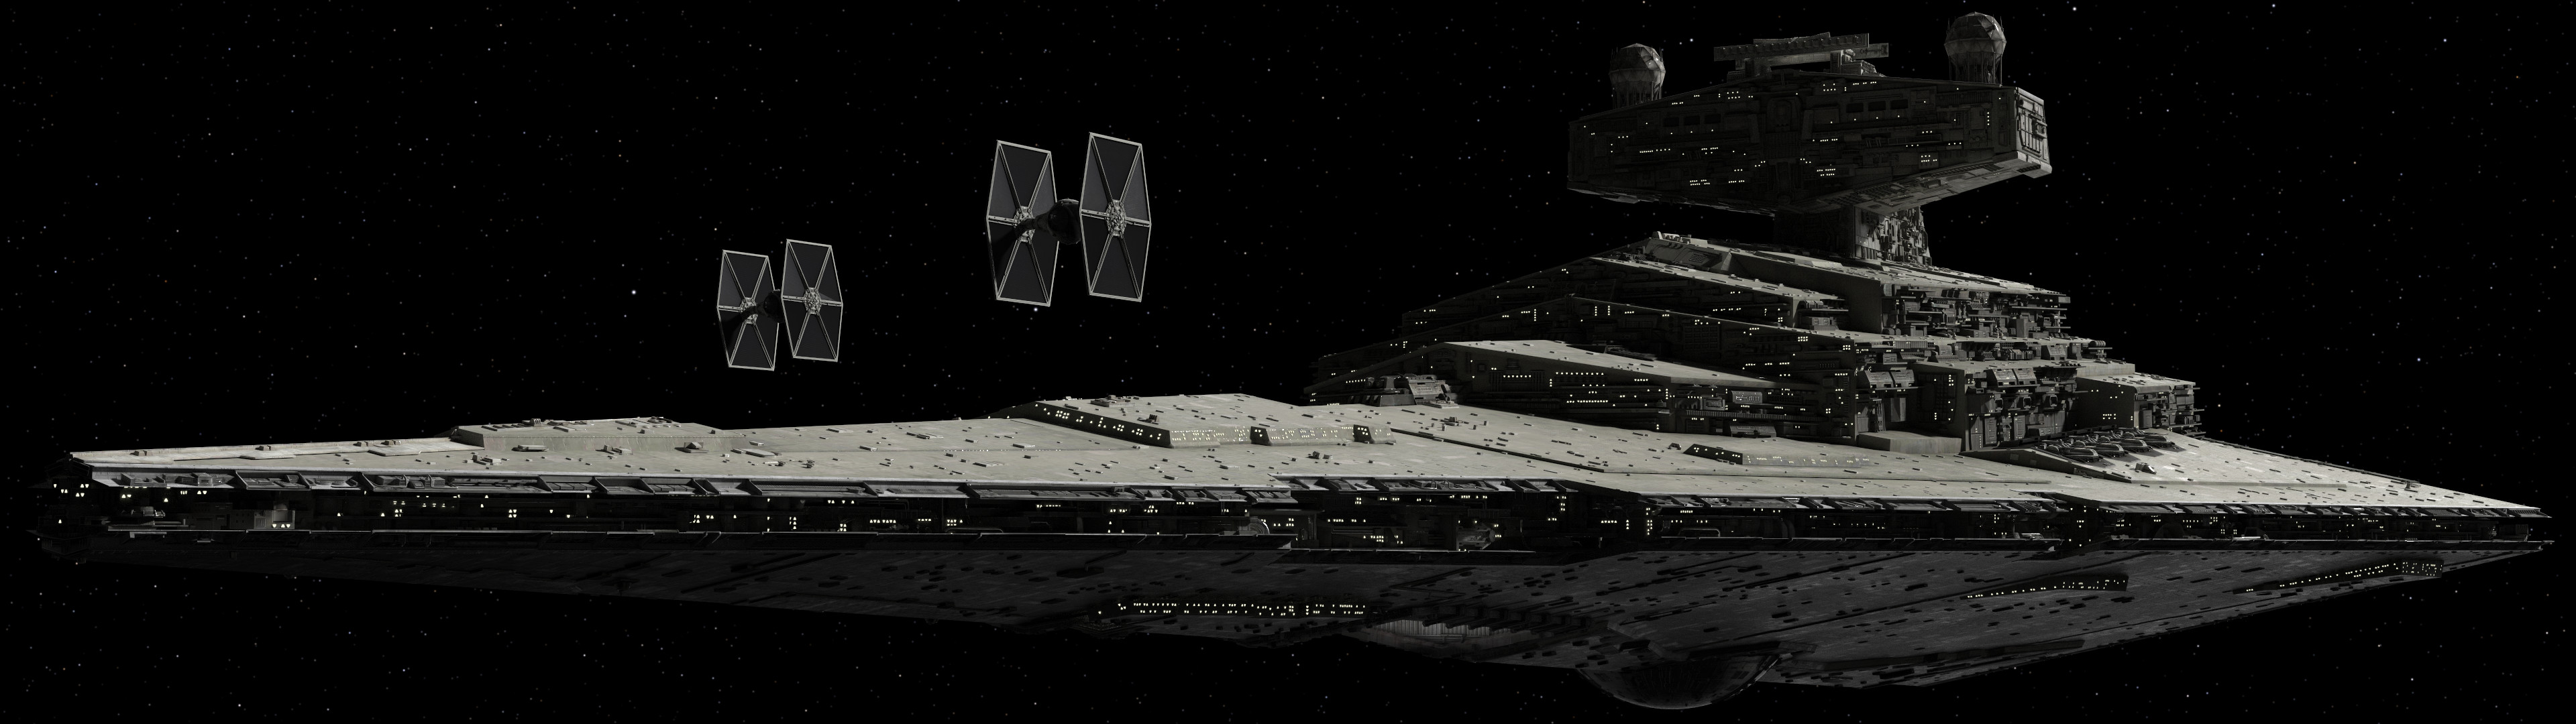 3840x1080 A few dual-monitor Star Wars wallpapers I made